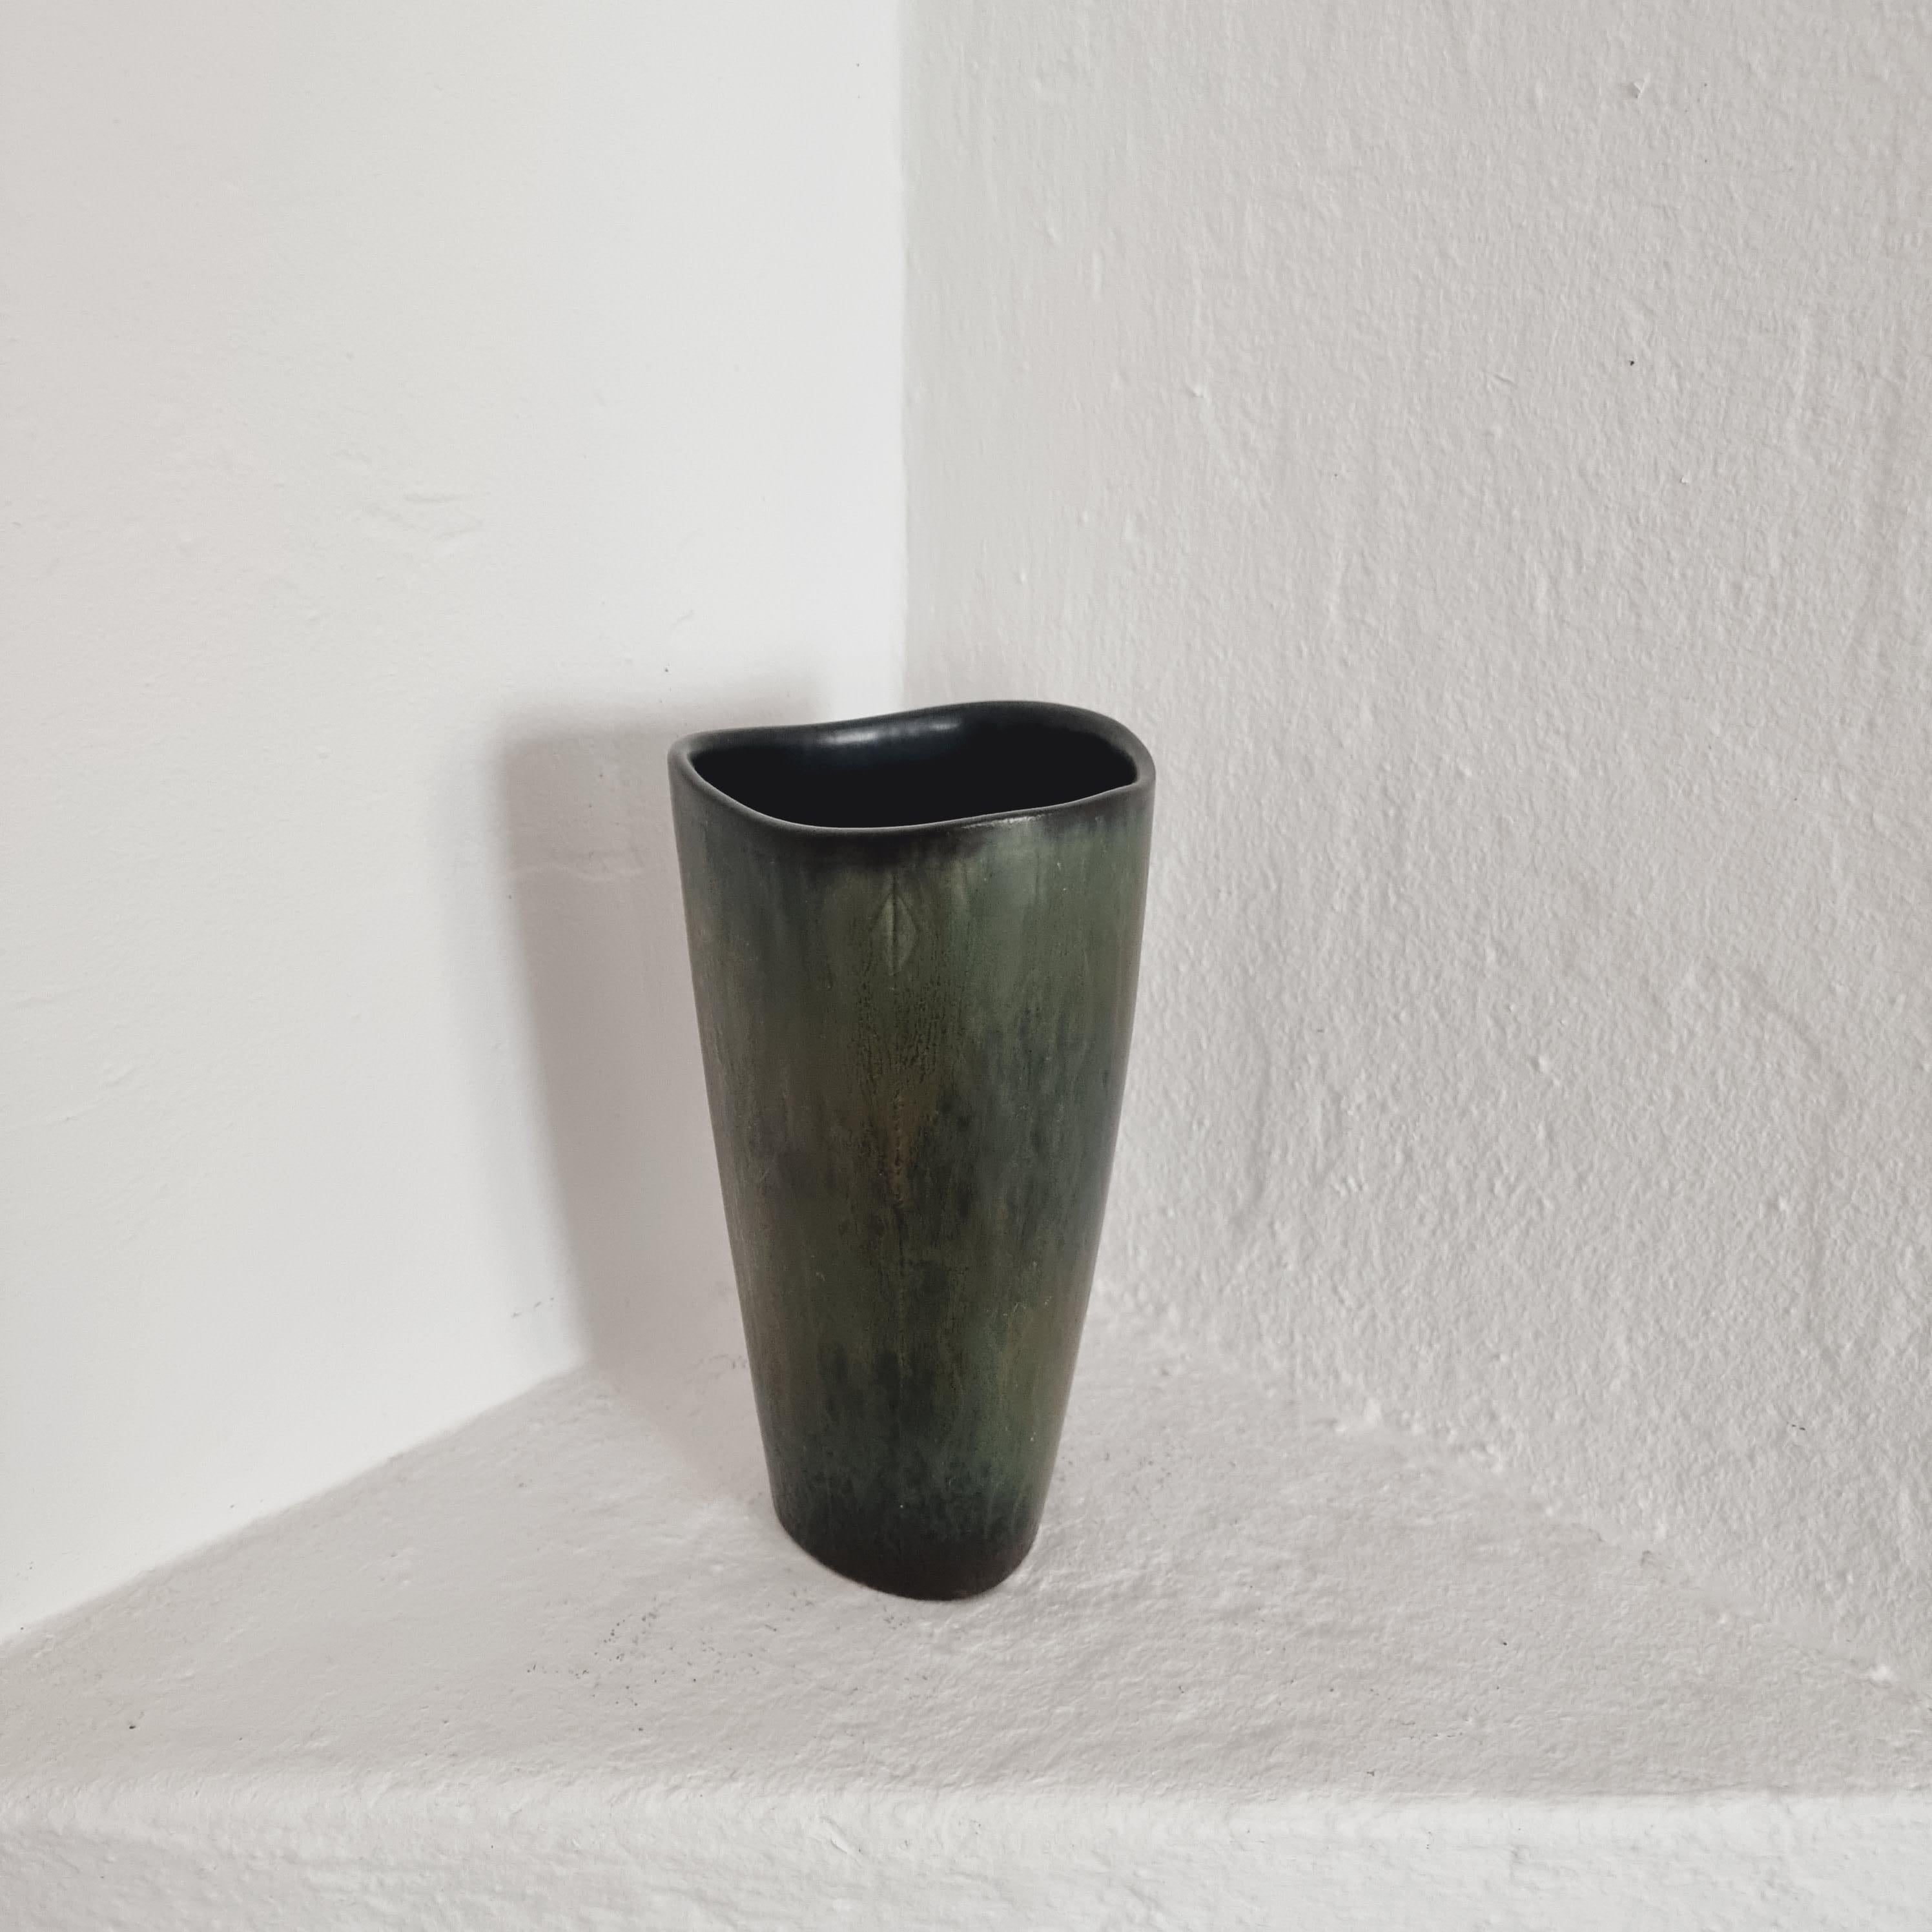 Large ceramic vase by Gunnar Nylund for Rörstrand, Sweden Mid-1900s. 

Beautiful dark glaze. Signed. In good condition, few smaller signs of age and wear.